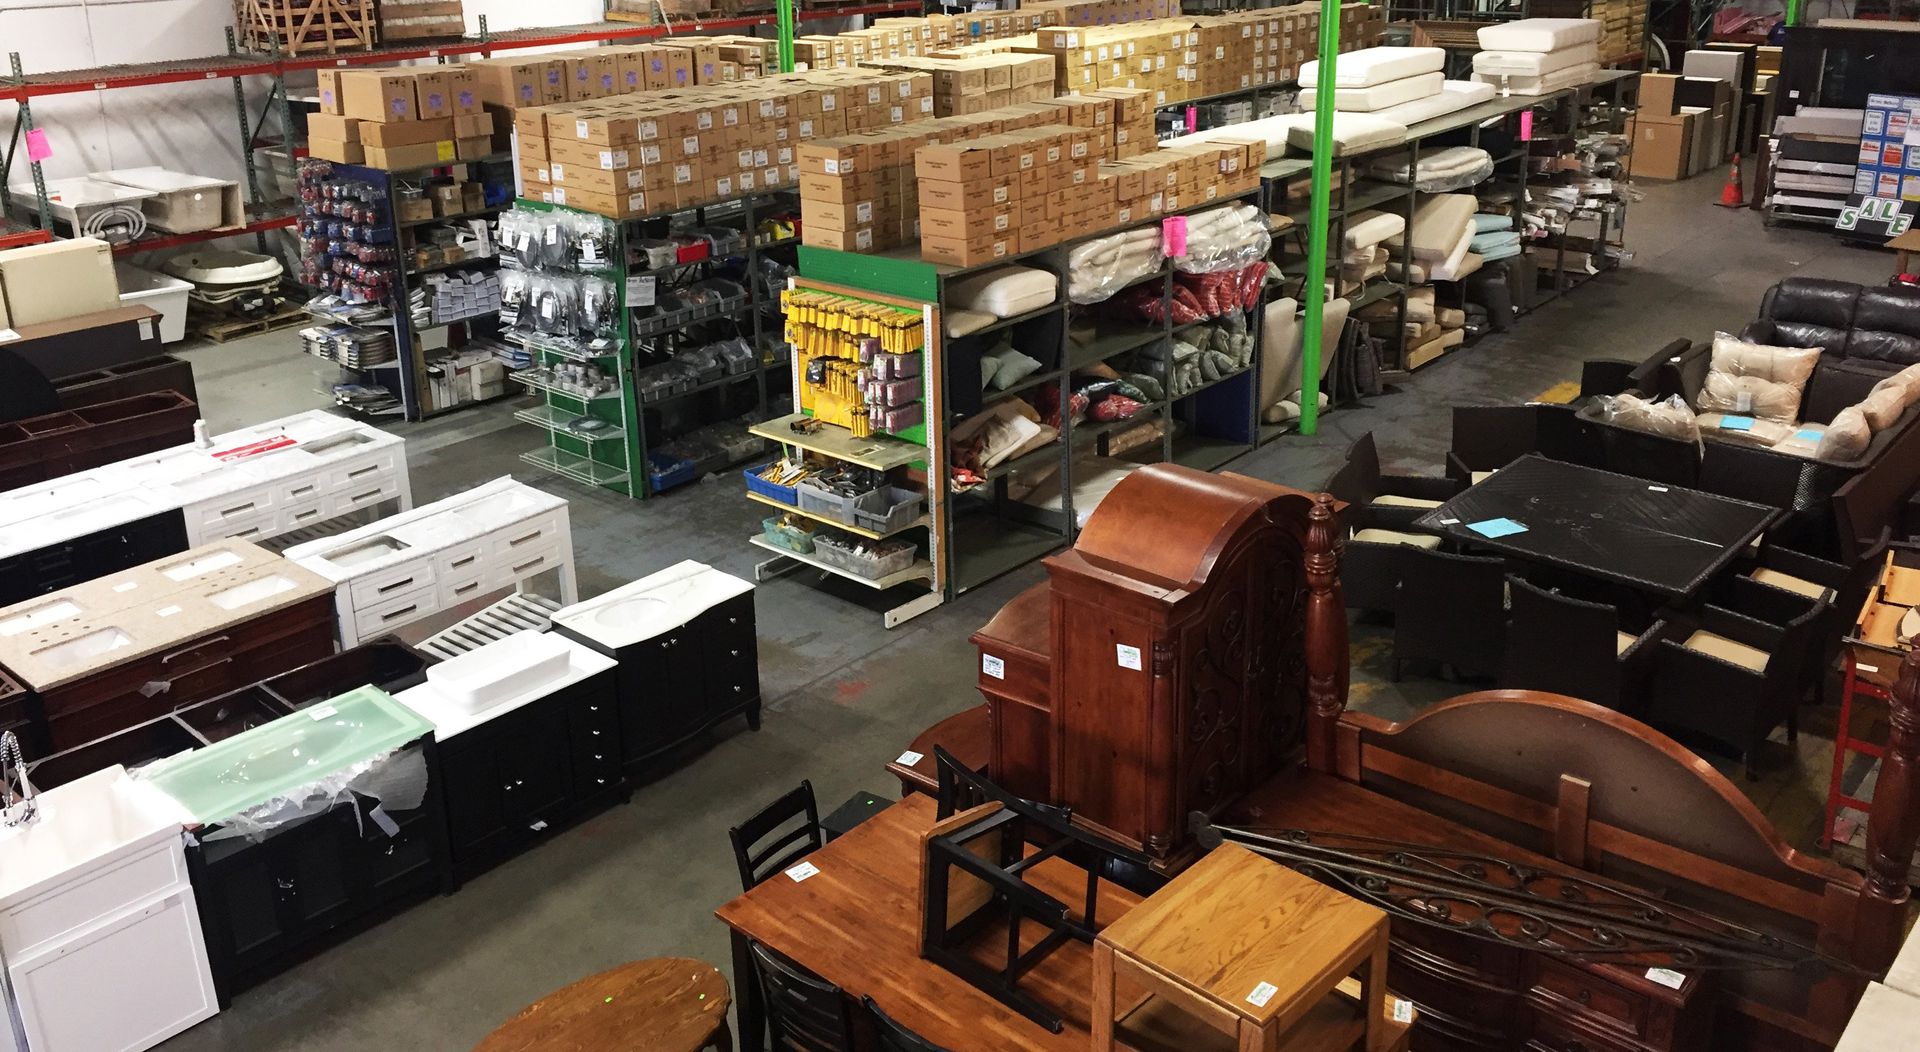 The Riverside ReStore offers a diverse selection of home improvement items, home decor, furniture, tools, supplies, DIY, windows, doors,